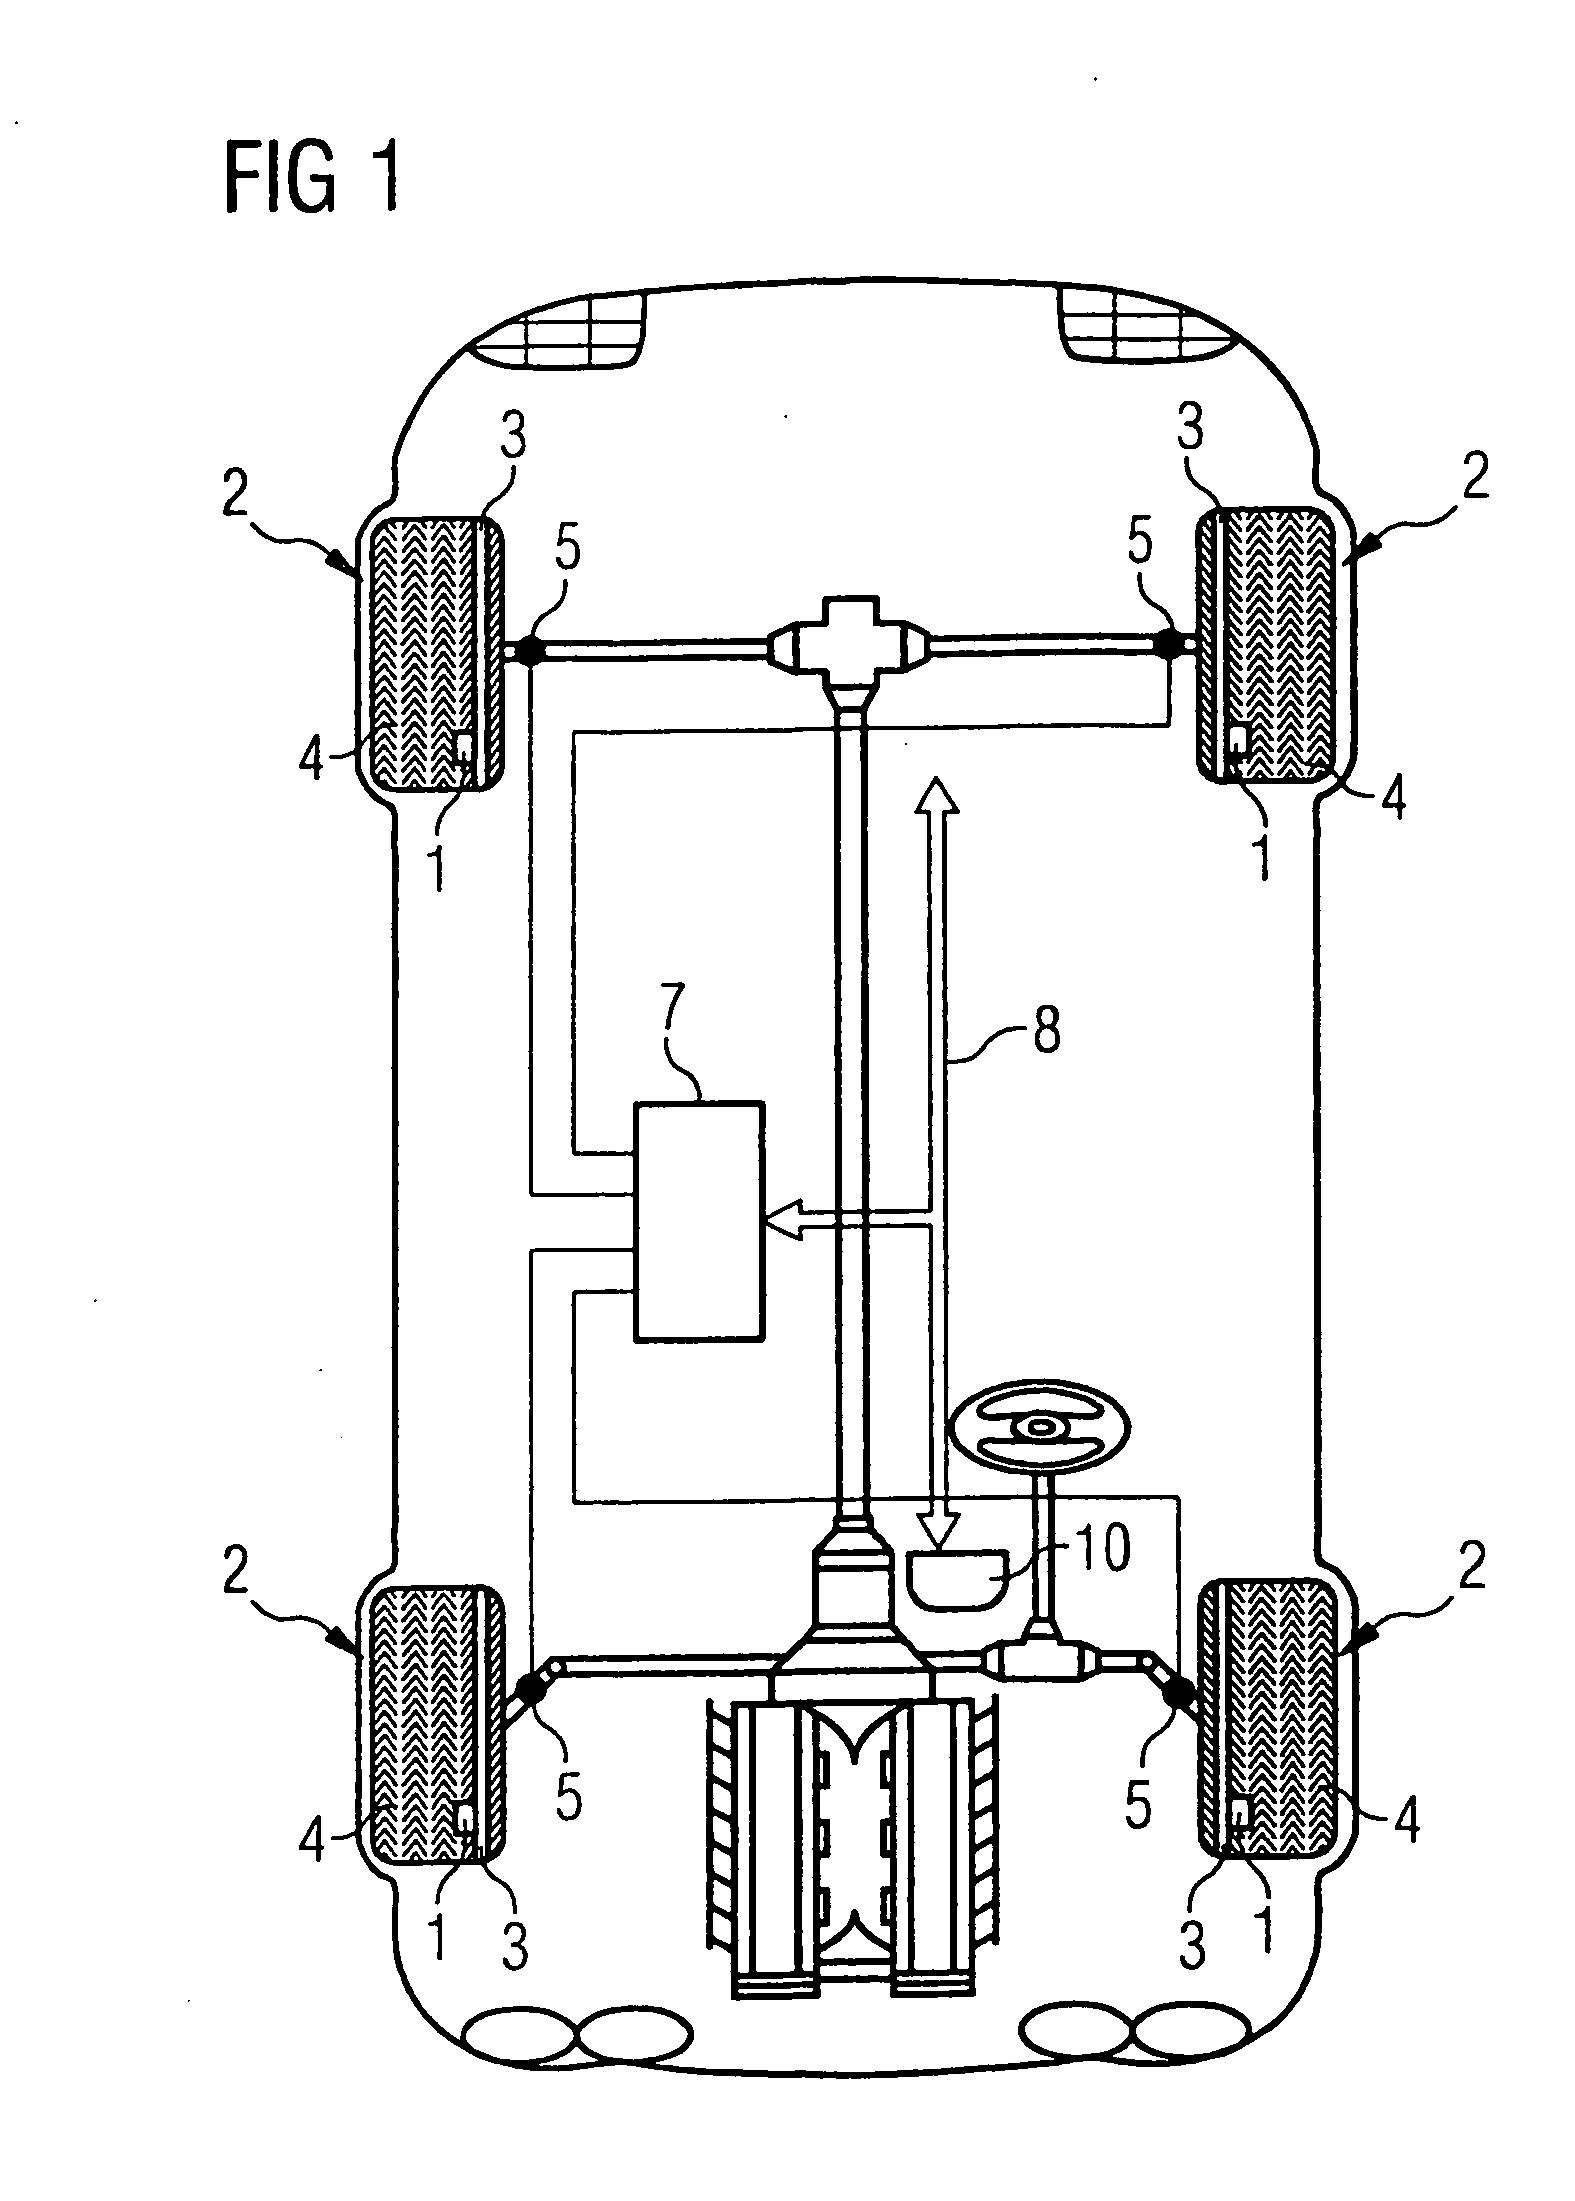 Configuration and method for bidirectional transmission of signals in a motor vehicle